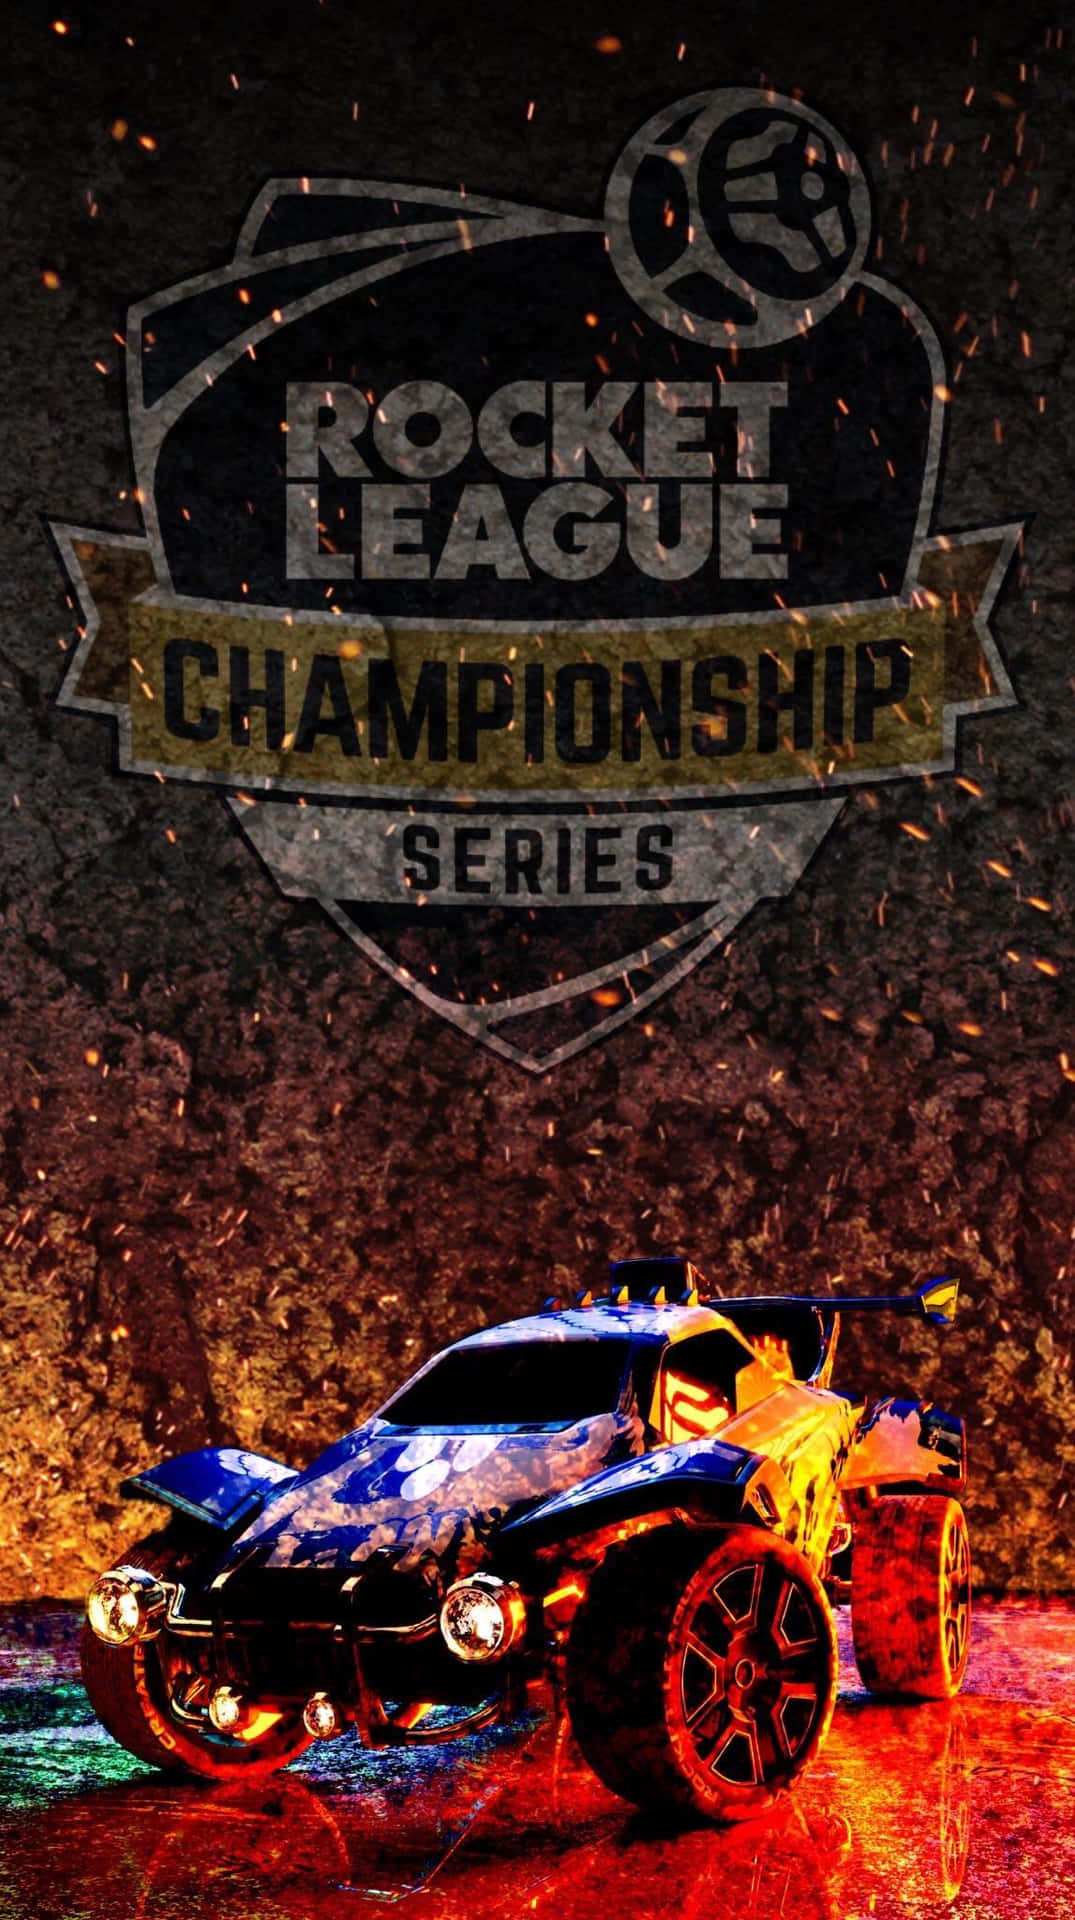 Experience the glory of Rocket League